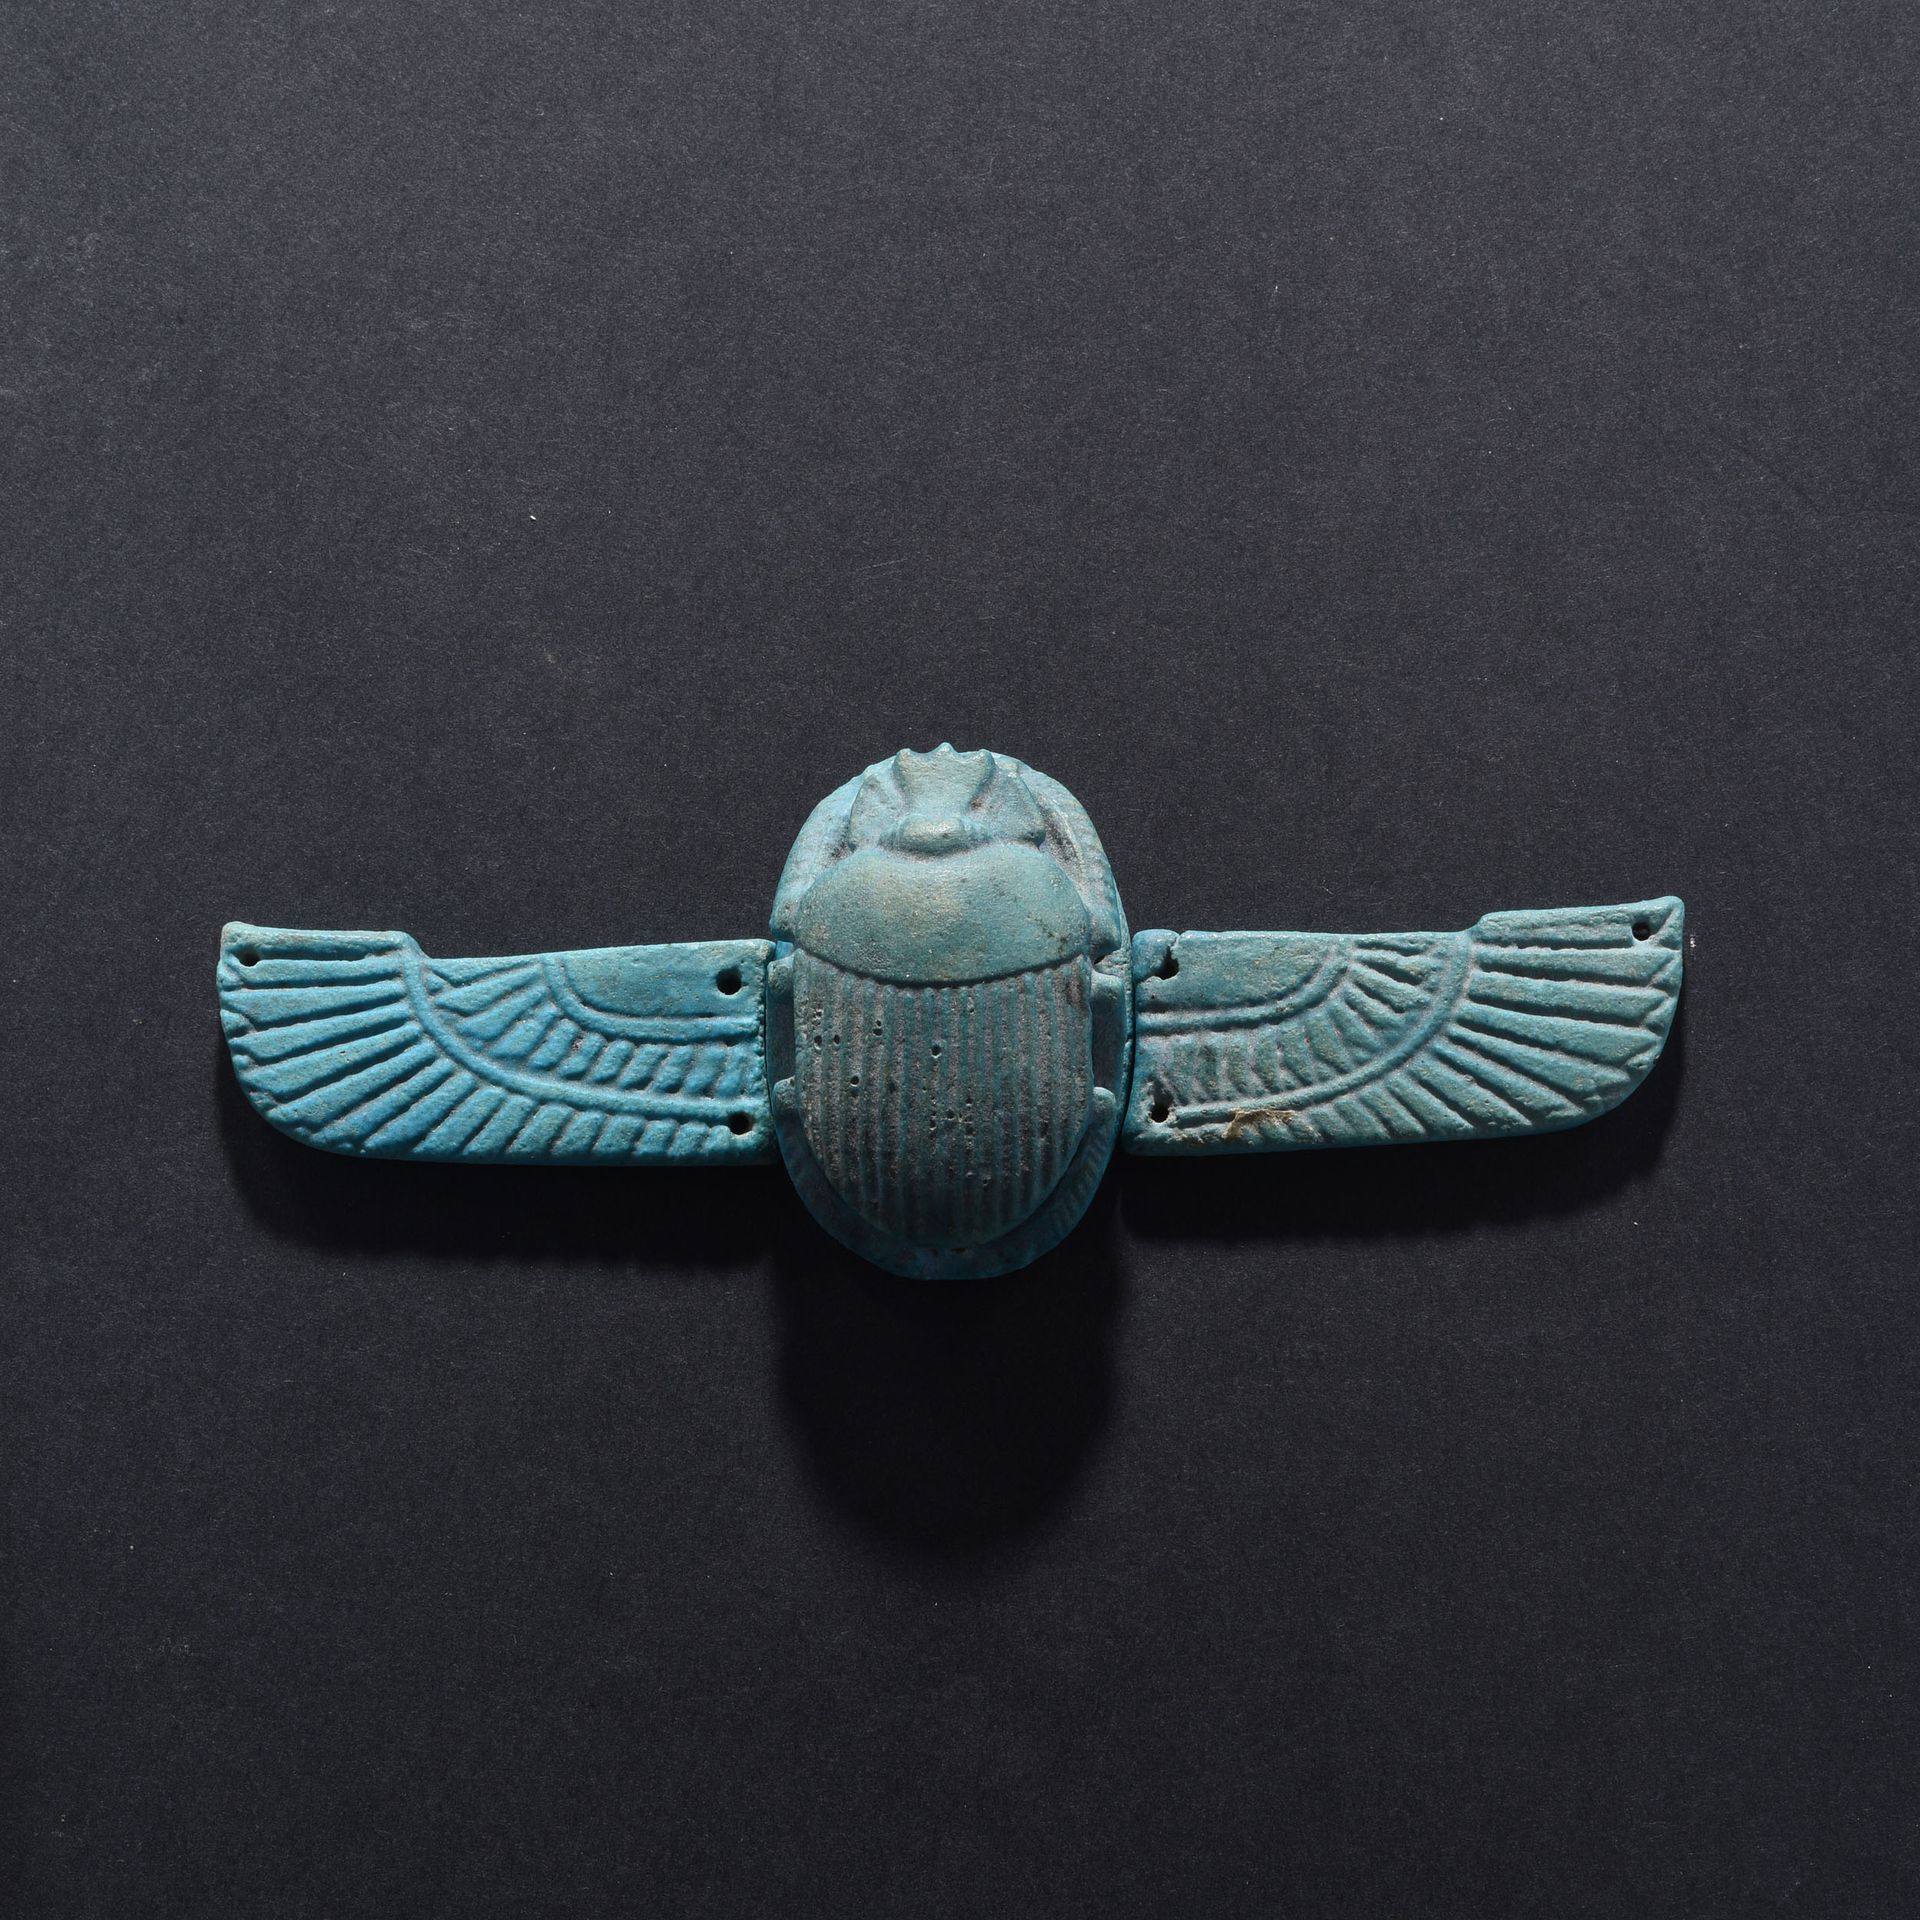 Null FUNERARY ORNAMENT

Egypt, Ptolemaic period, 332-30 BC

Consisting of a scar&hellip;